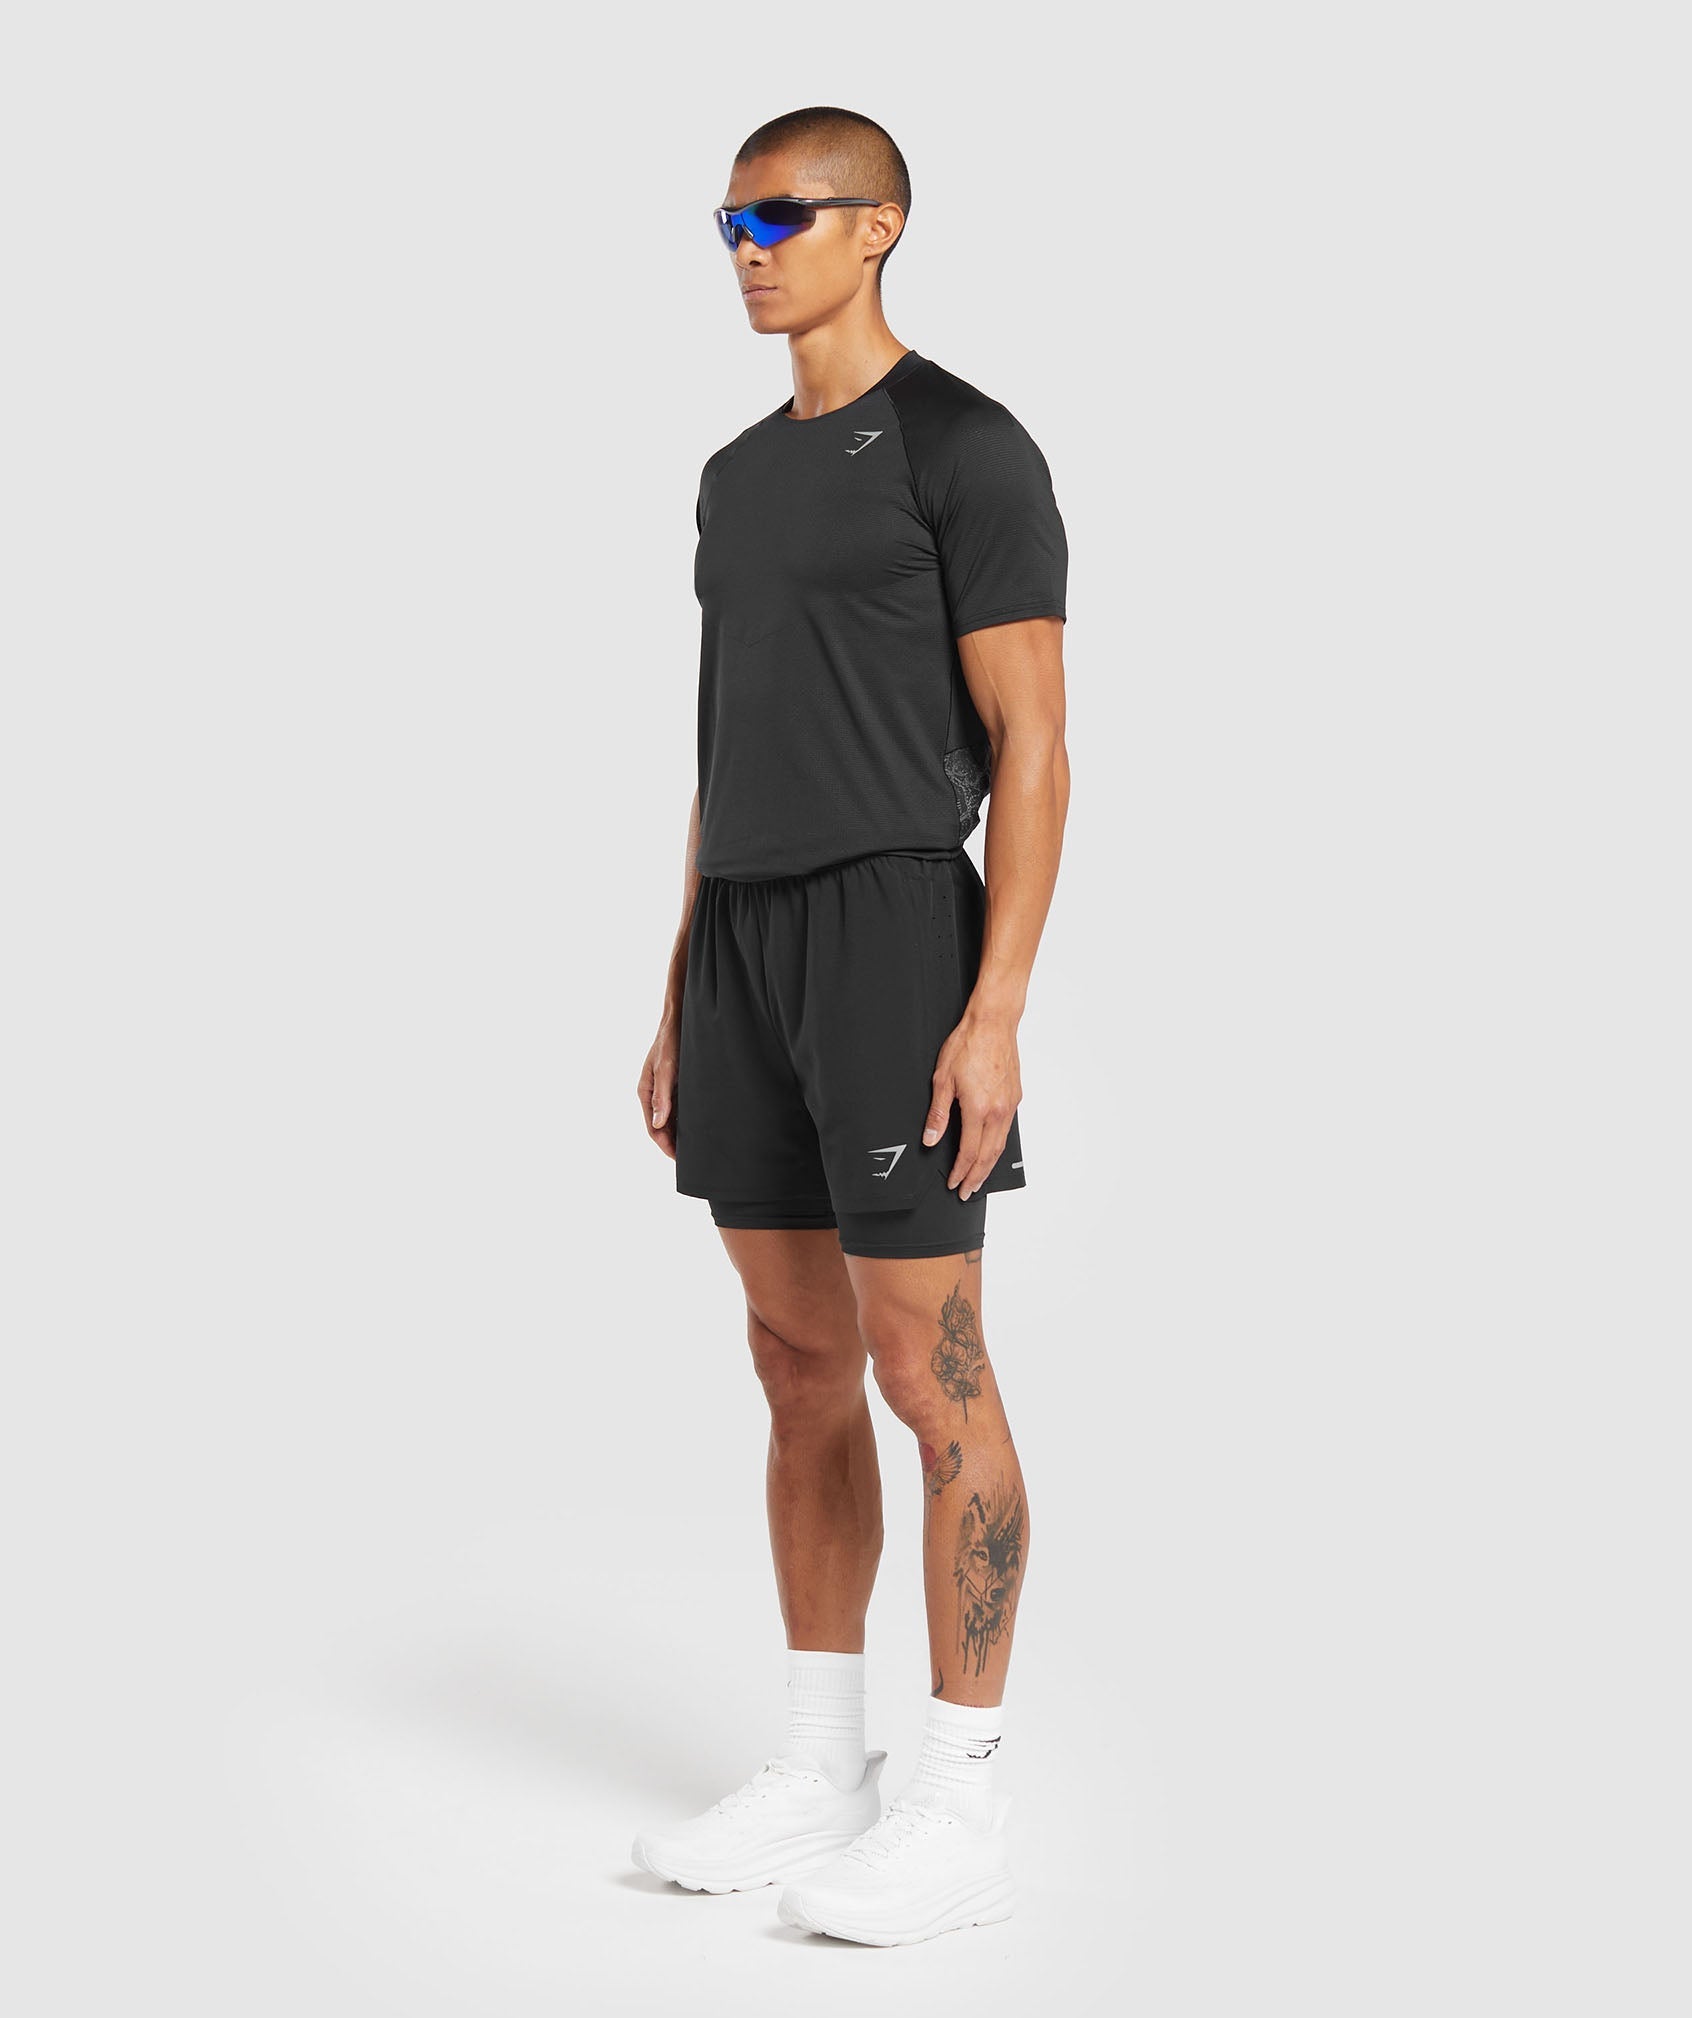 Speed 5" Shorts in Black - view 6